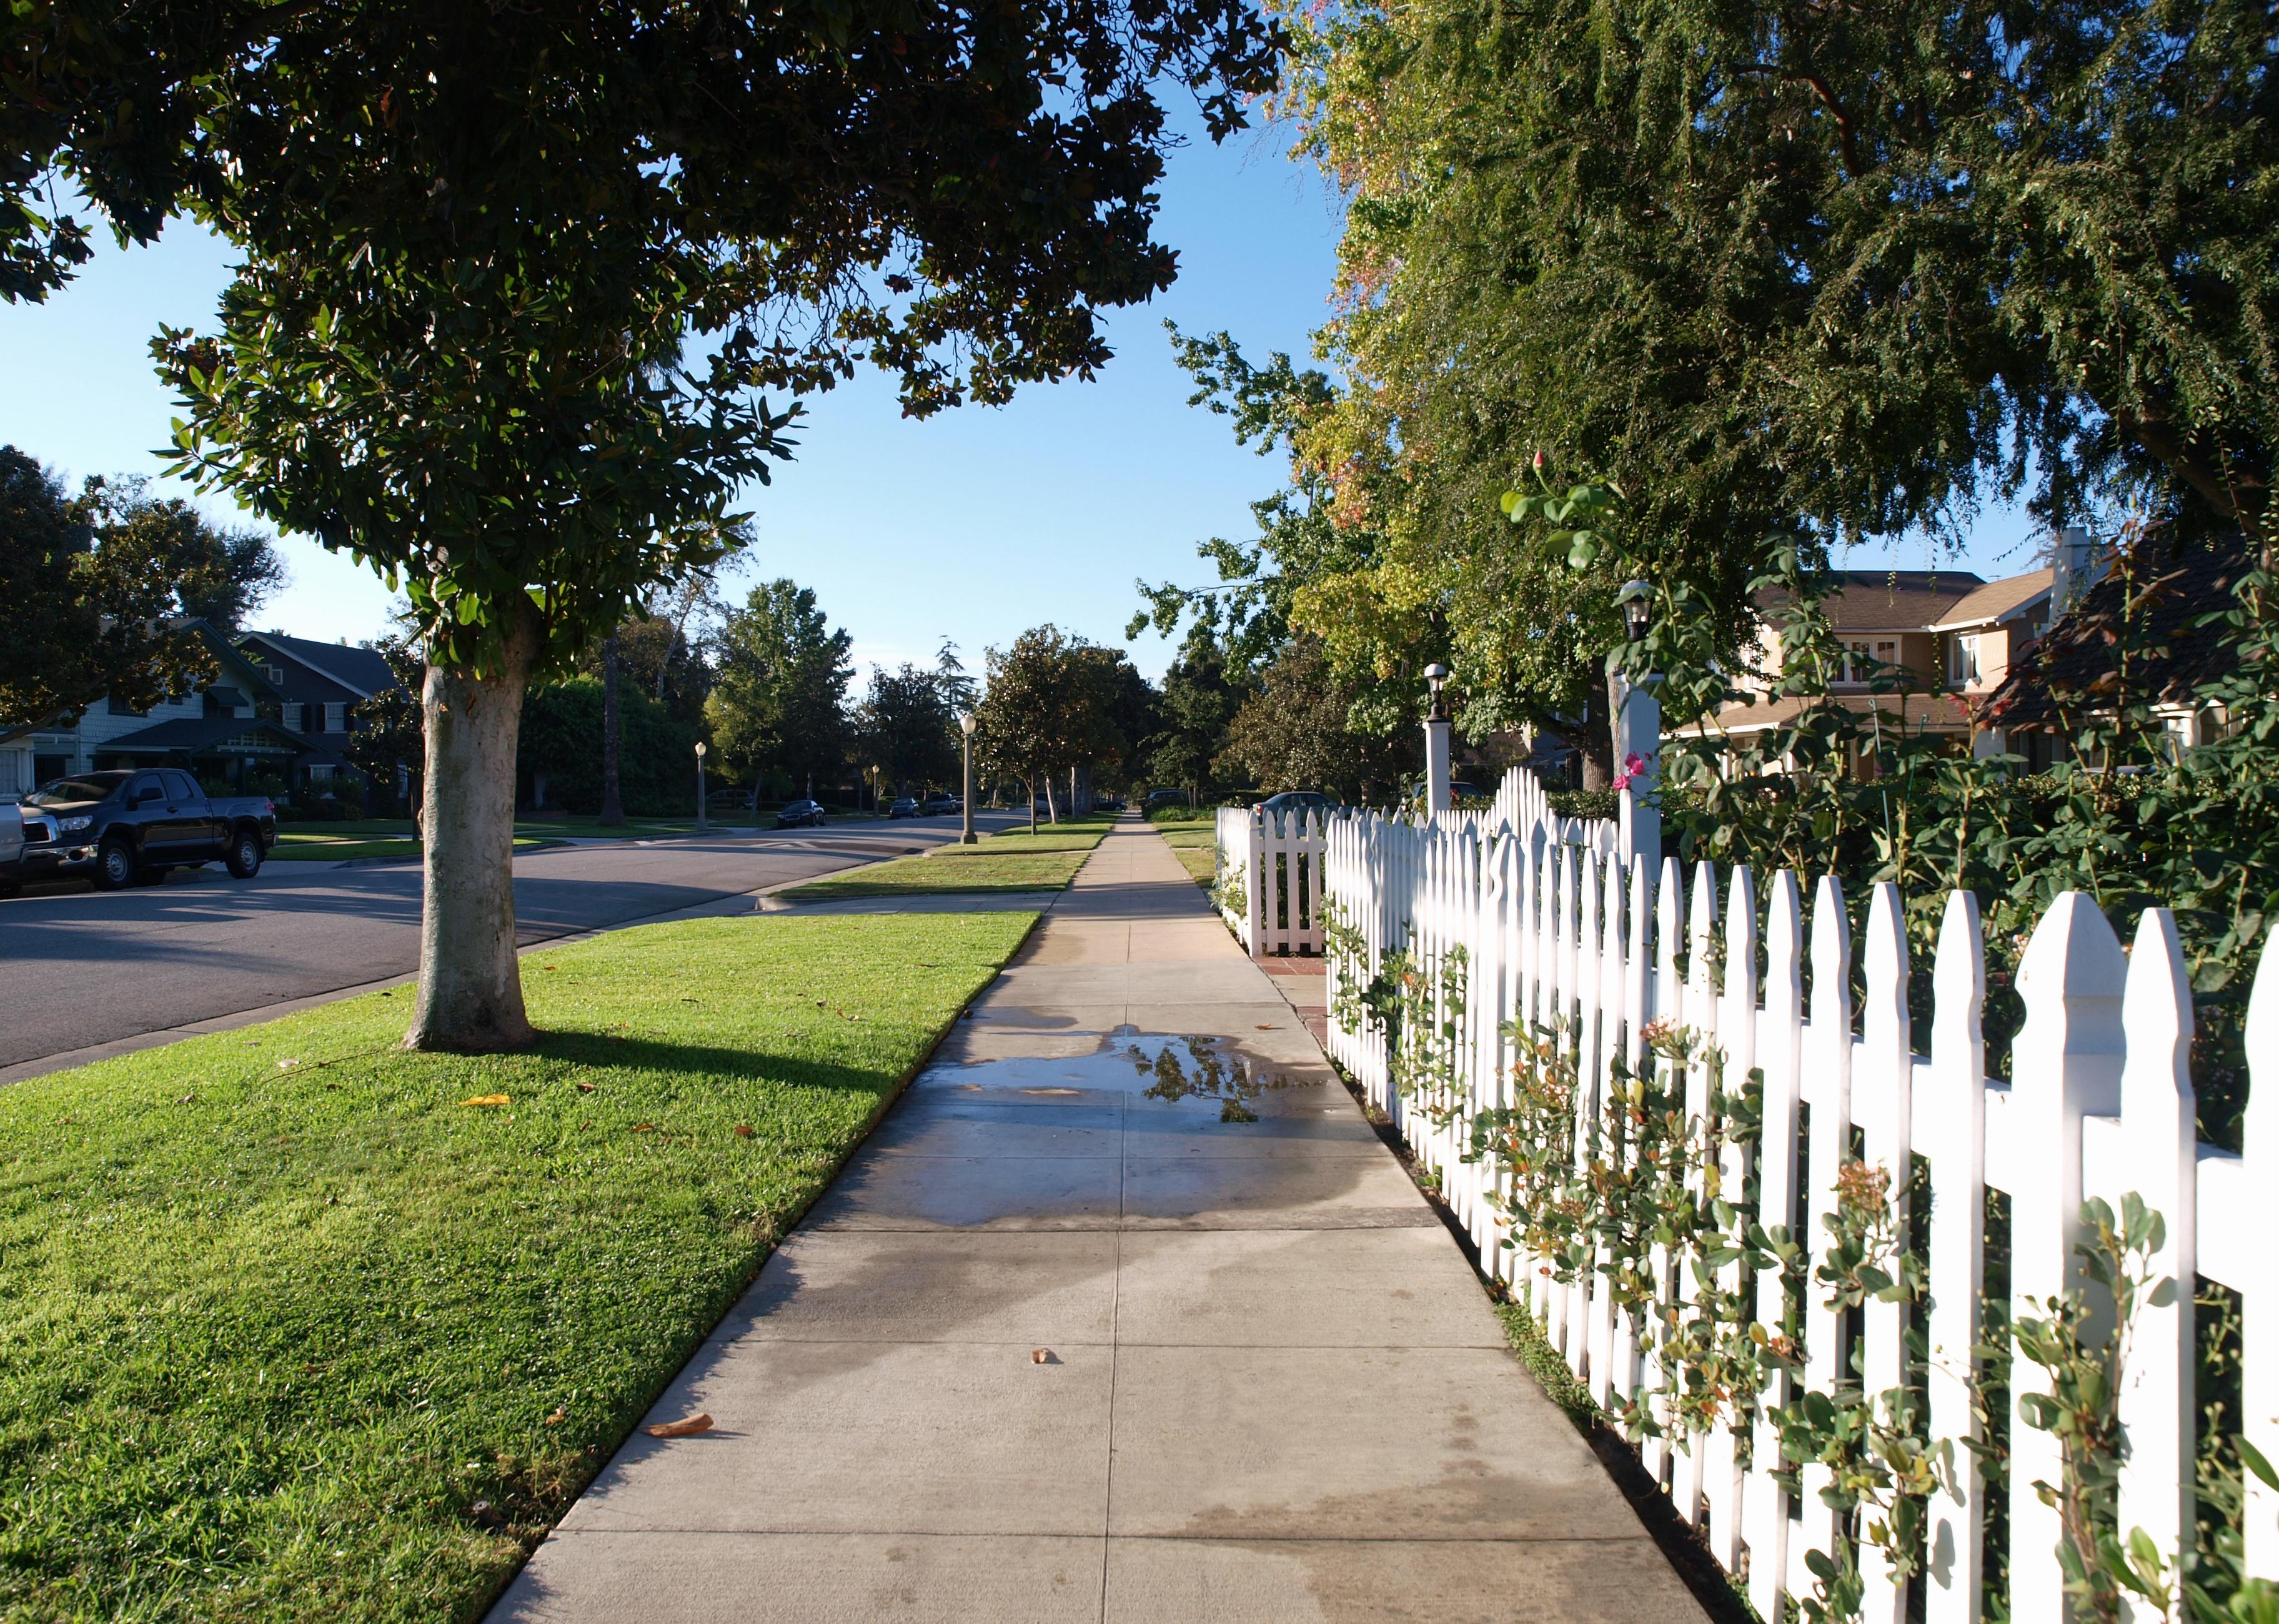 Picket fence on a pretty residential street